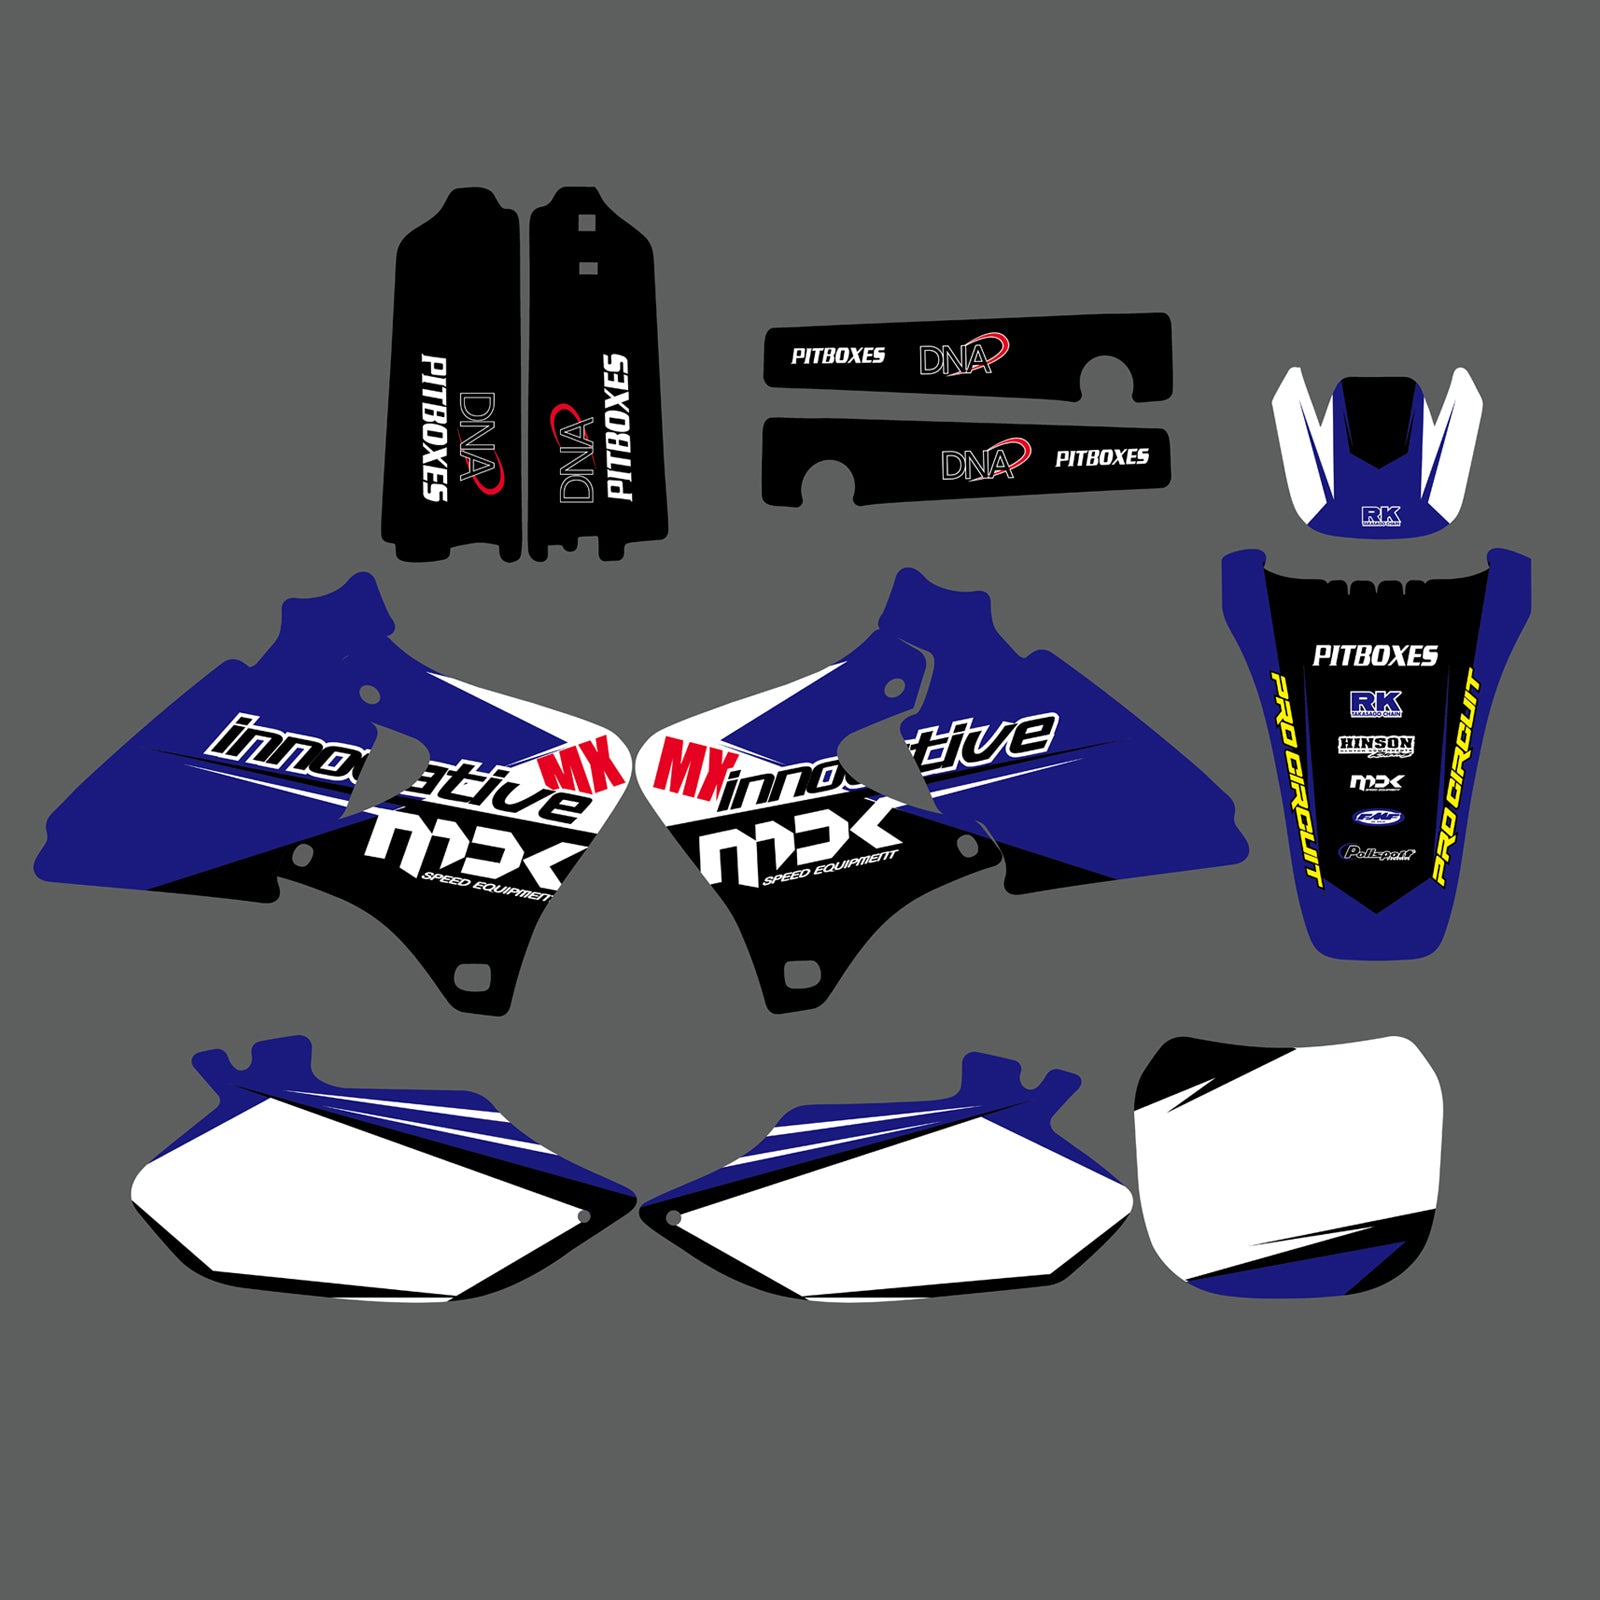 Team Graphics Backgrounds Decals Kit For Yamaha YZ250F YZ400F YZ426F 1998-2002